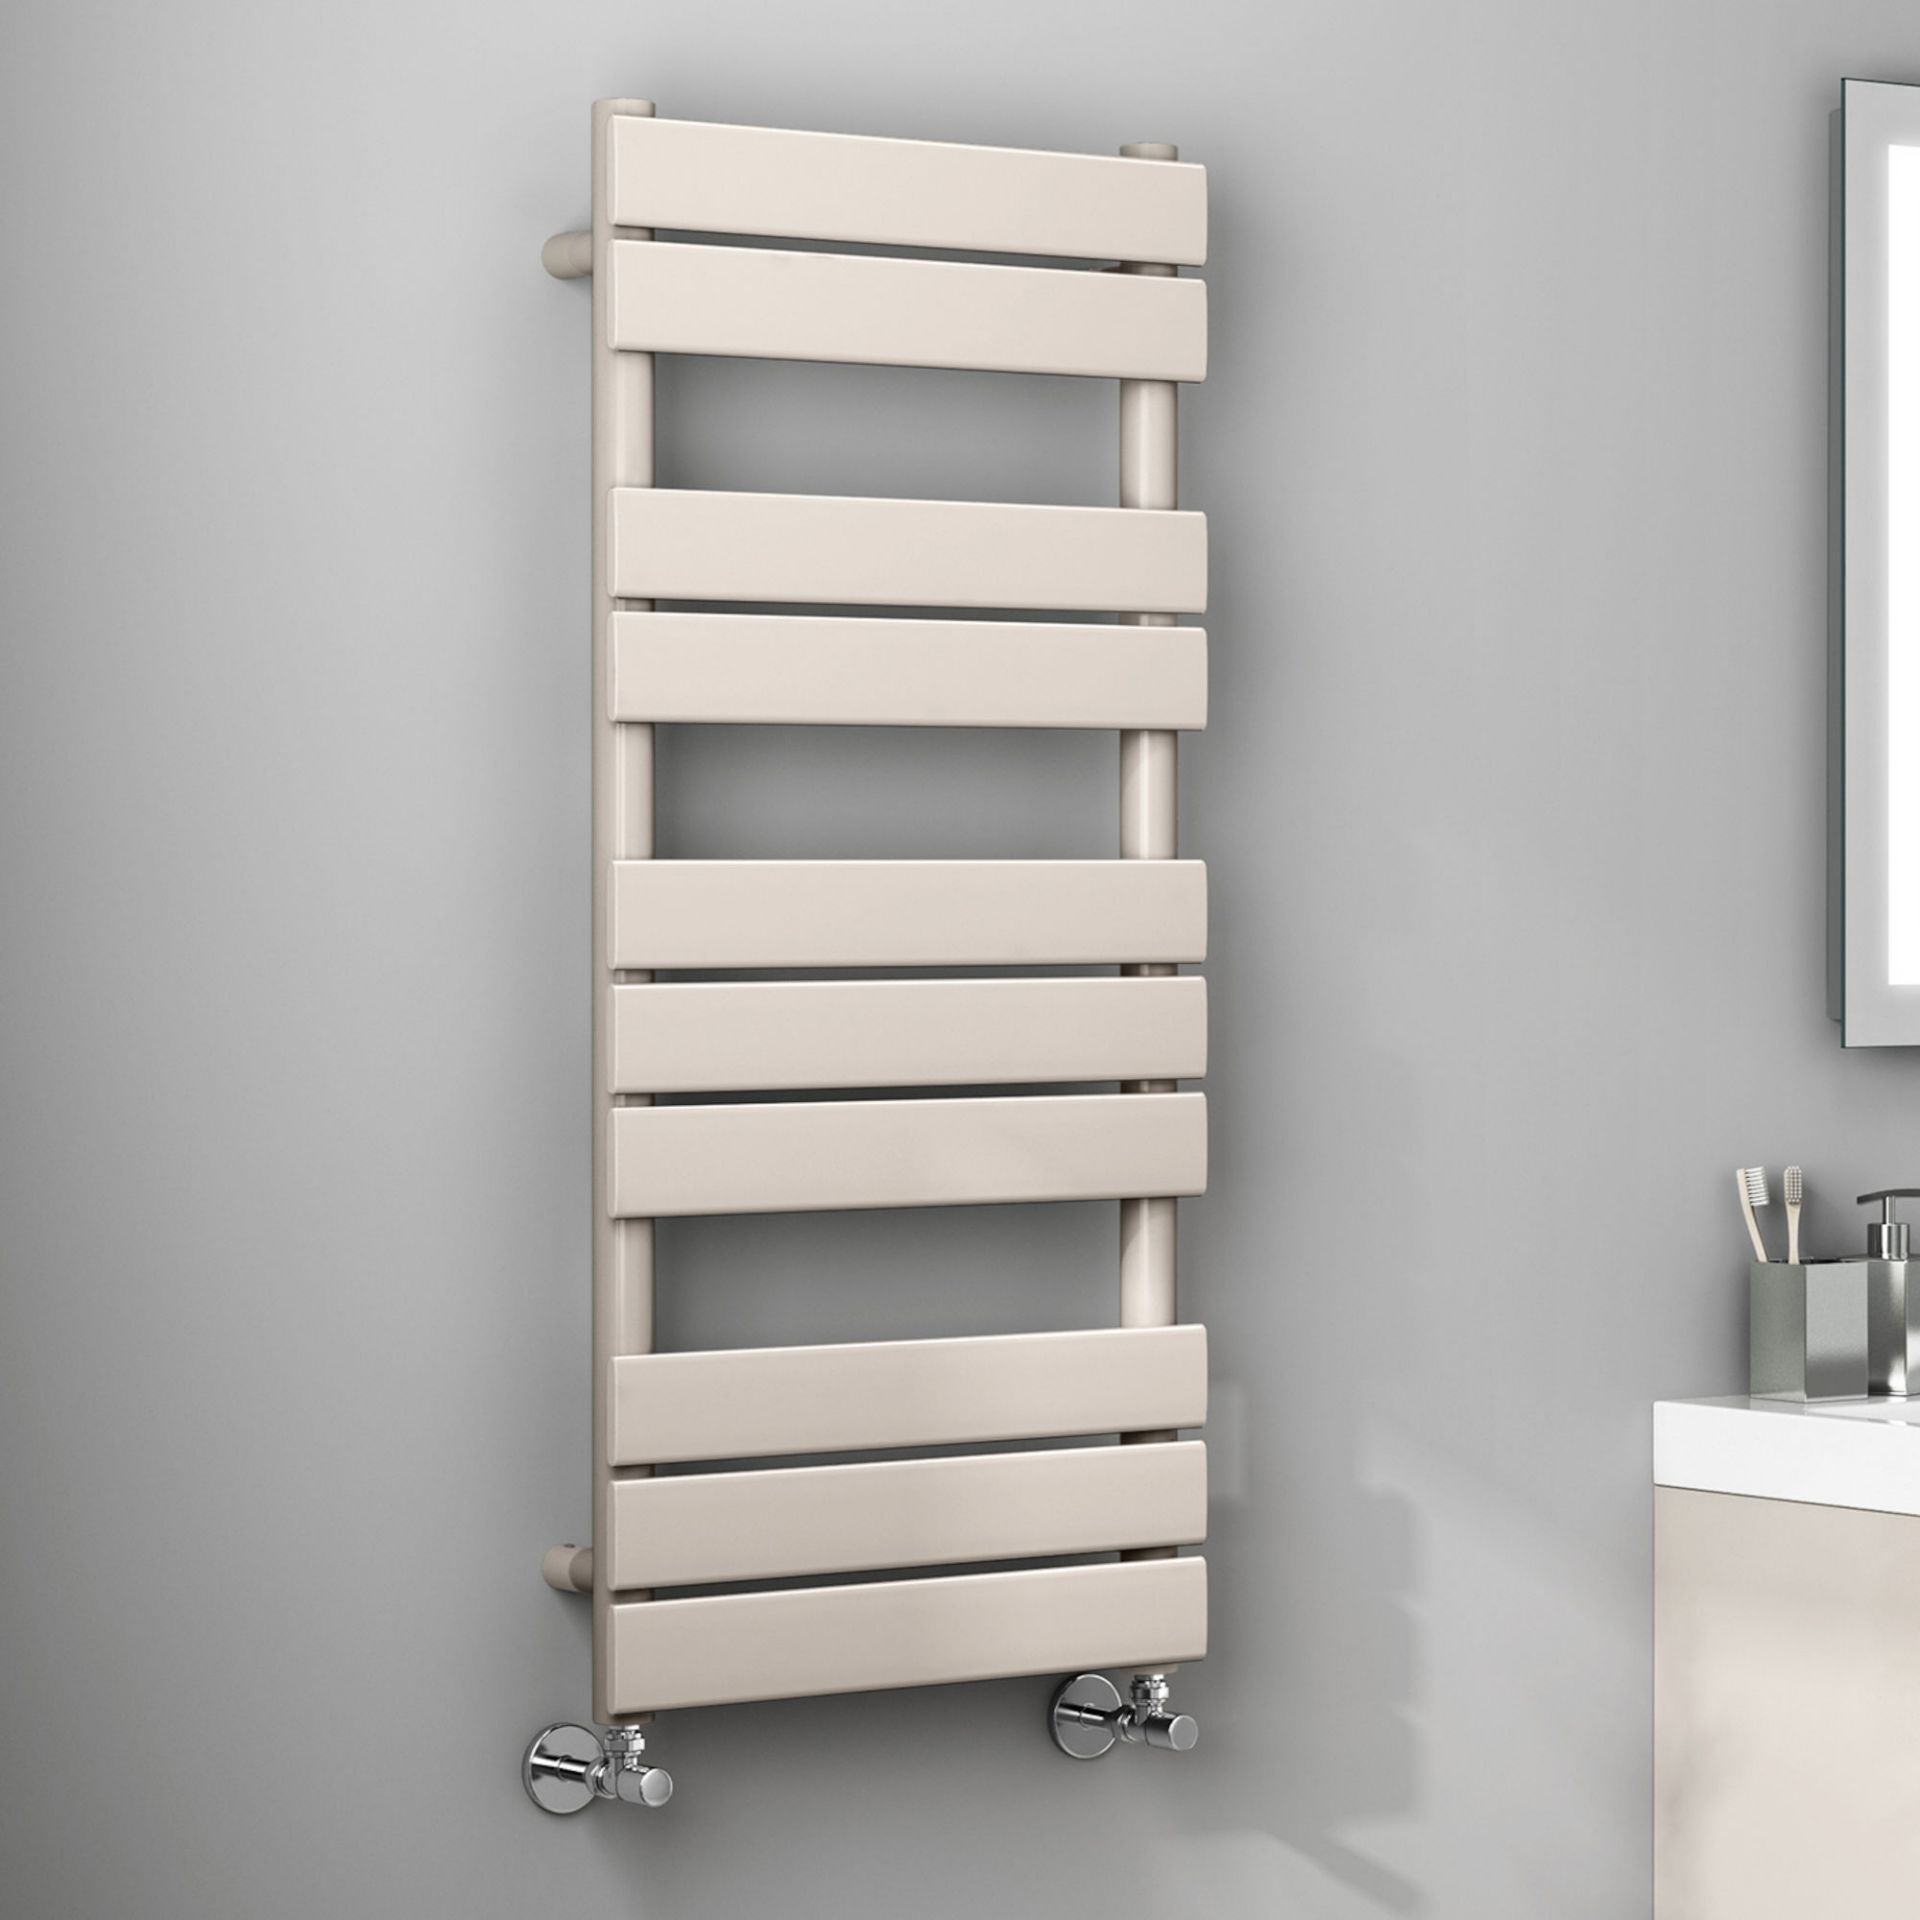 (JM117) 1000x450MM Flat Single towel radiator Cashmere. RRP £299.99. Made from high-quality low-